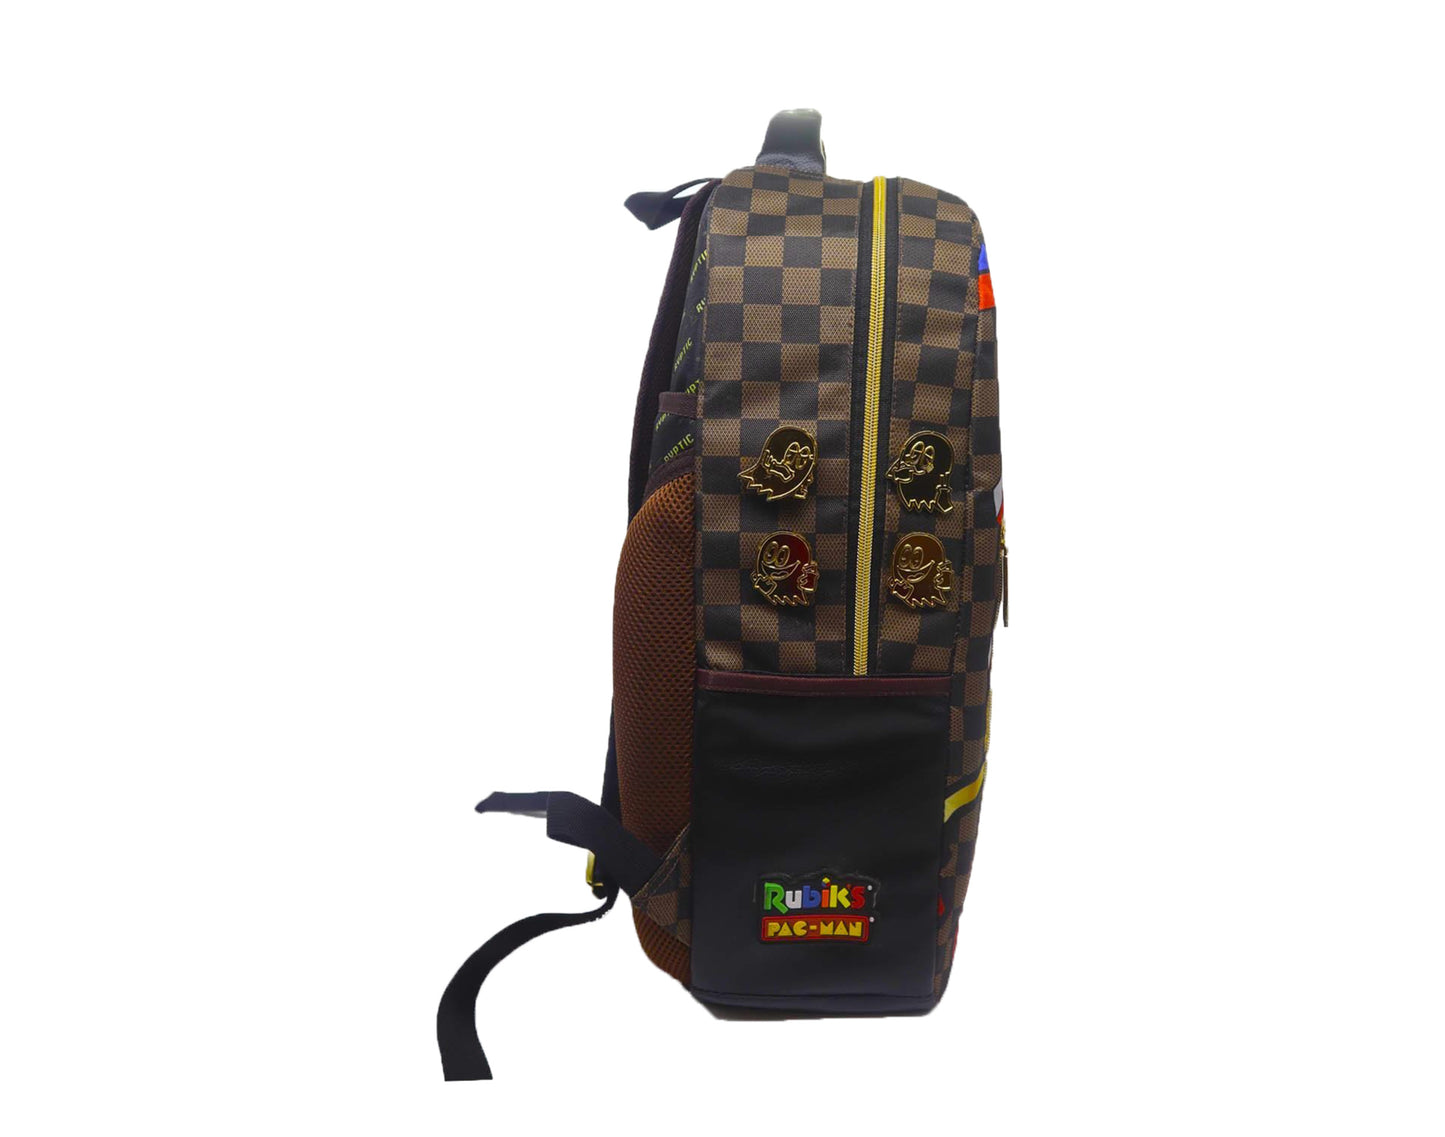 DeKryptic x Rubik's x Pac-Man - Couture Augmented Reality Backpack